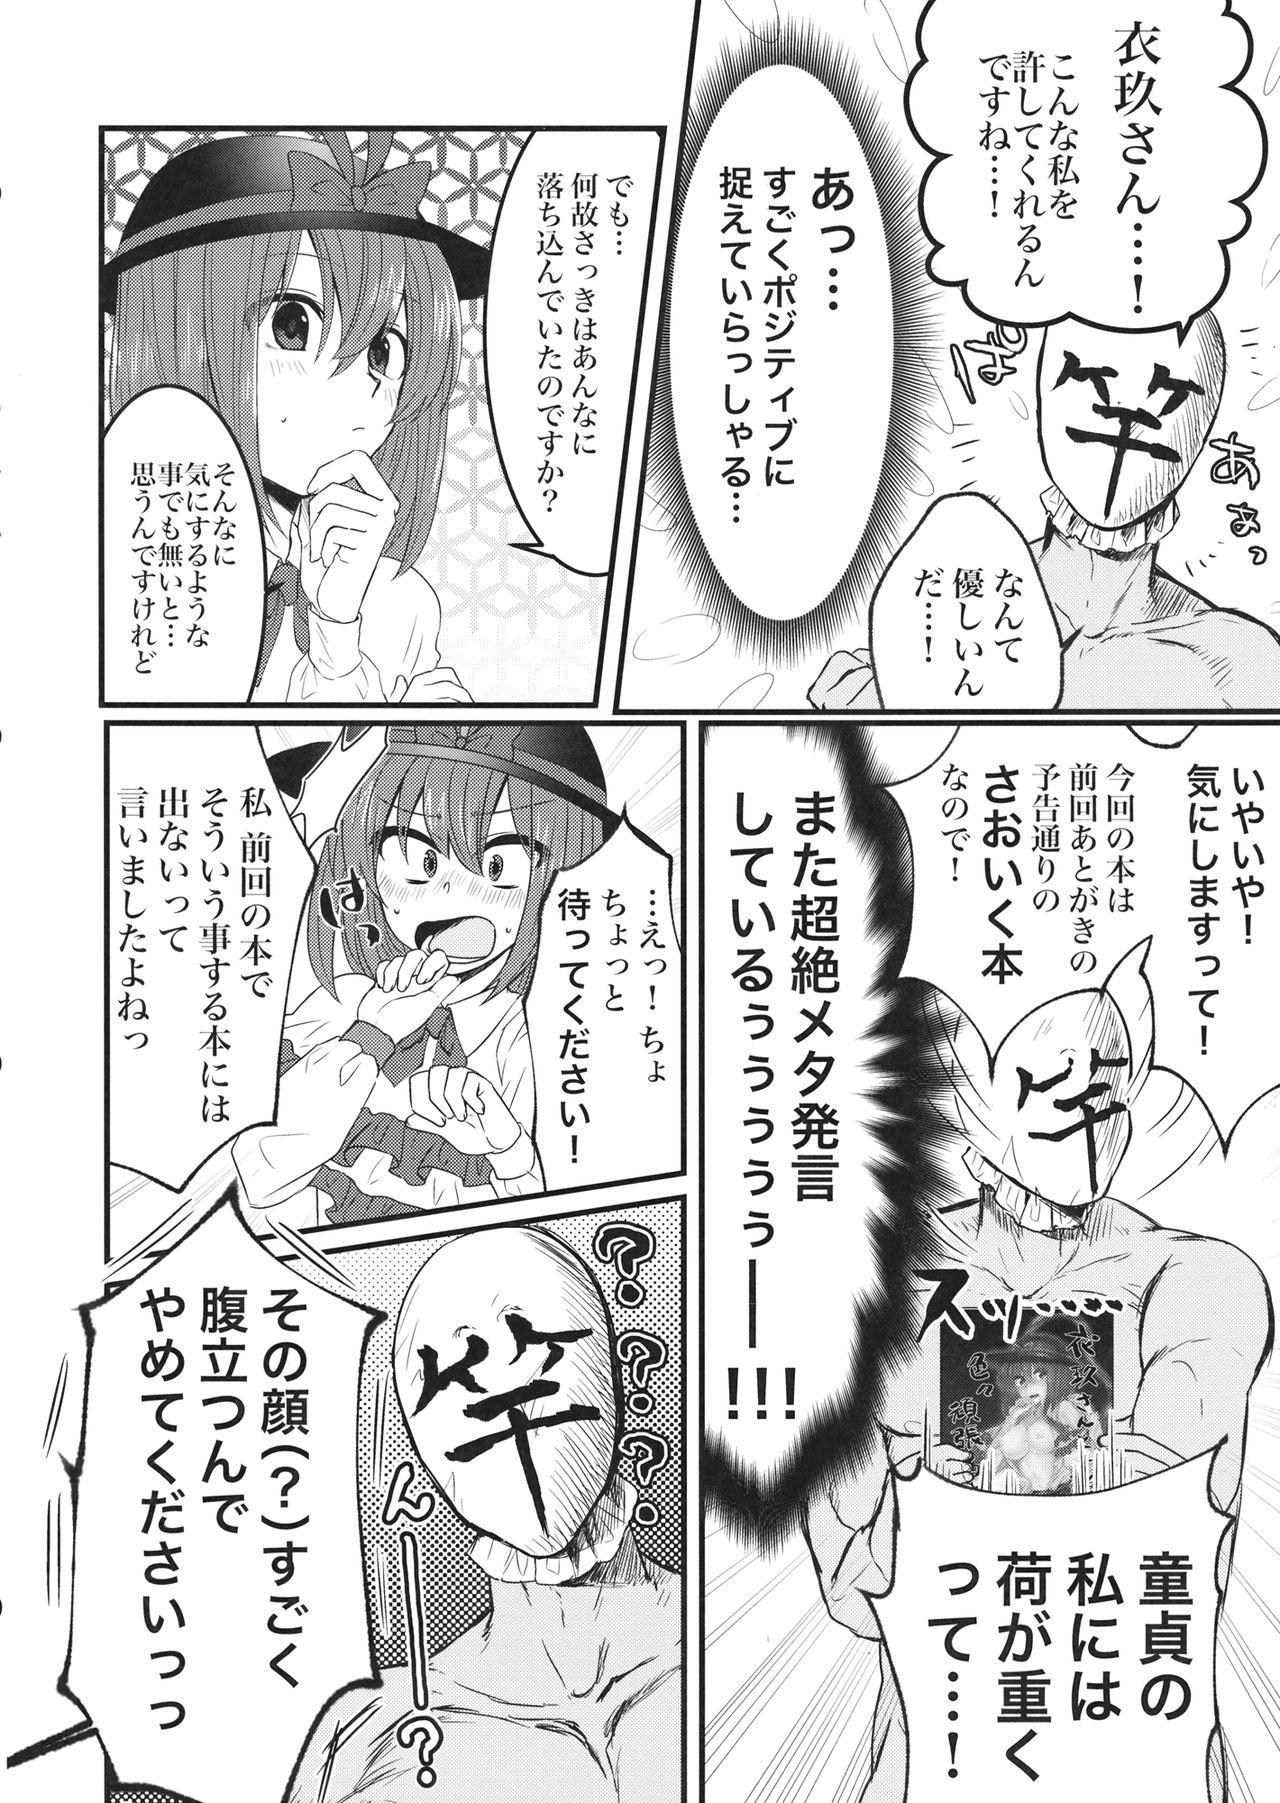 Family Porn 衣玖さんと一緒に色々頑張る本 - Touhou project Pussyeating - Page 7